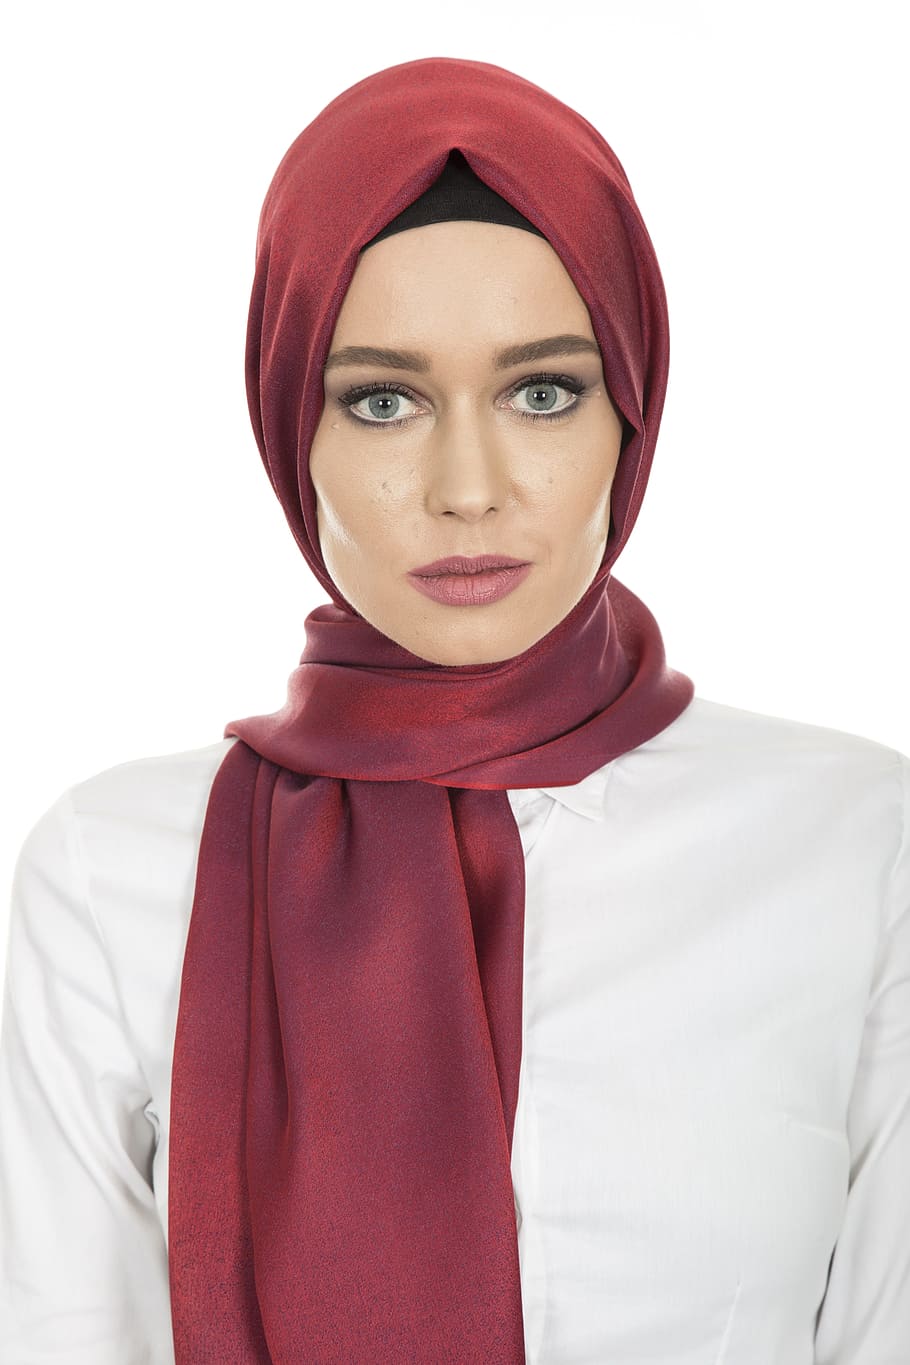 woman, white, top, red, headscarf, hijab, head cover, hair, scarf, women's